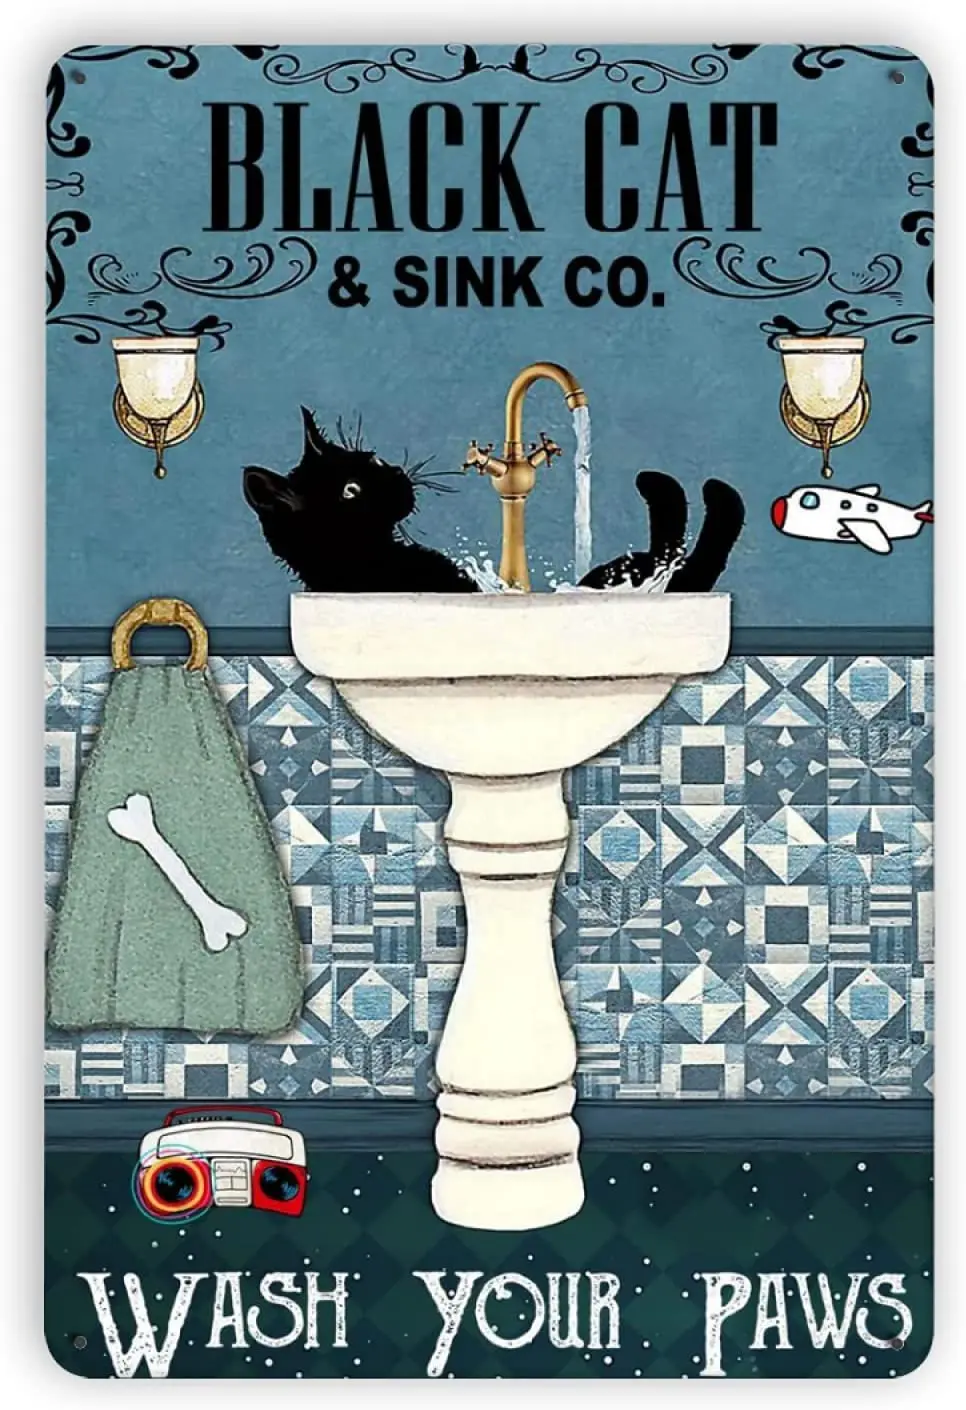 

DZGlobal Cat Tin Sign - Vintage Black Cat Wash Your Paws Tin Sign for Cat Crossing Sign, Bathroom Backyard Garage Man Cave Shed